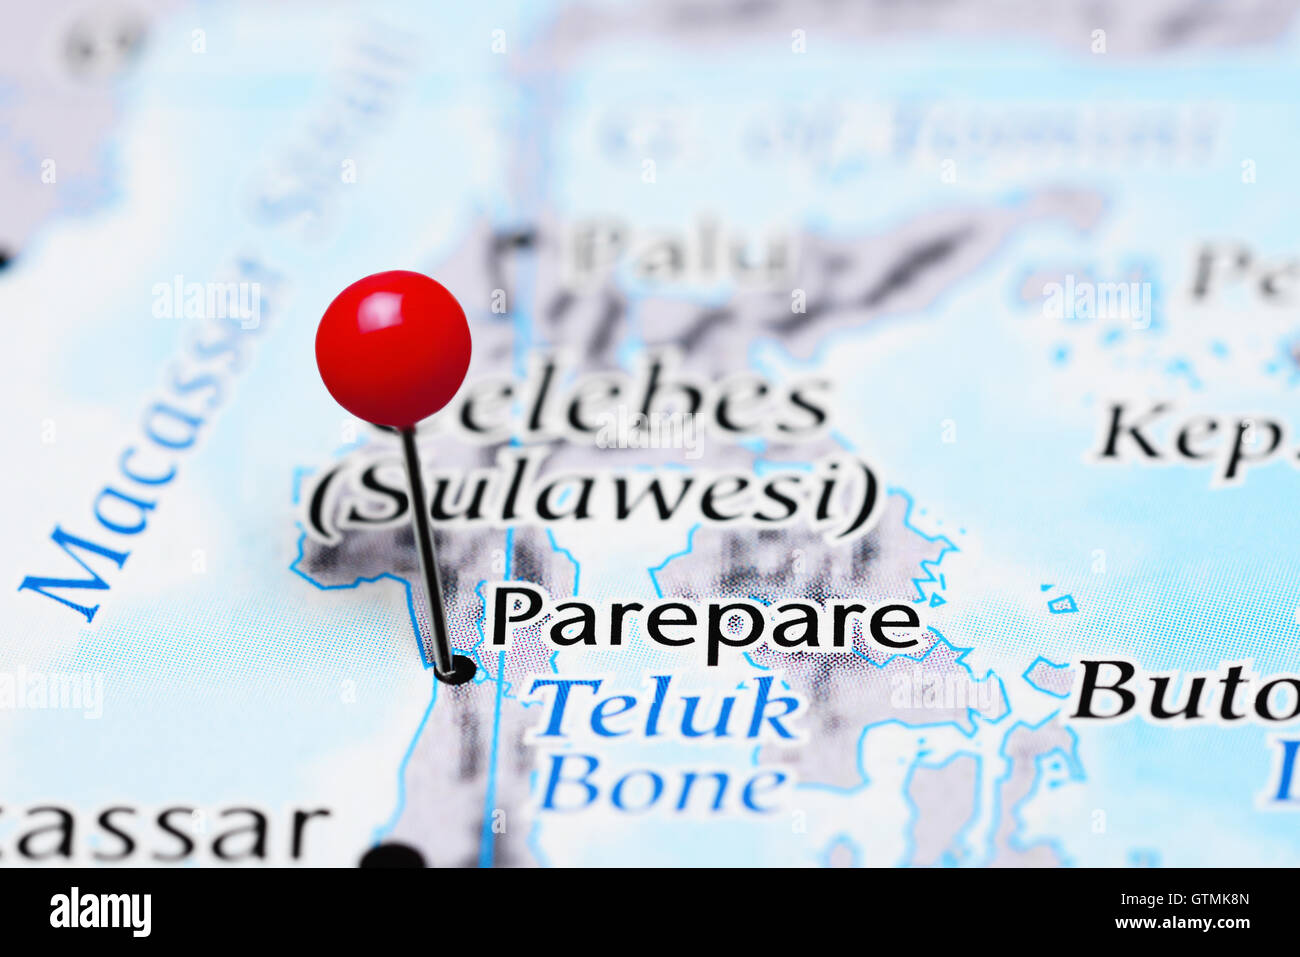 Parepare pinned on a map of Indonesia Stock Photo